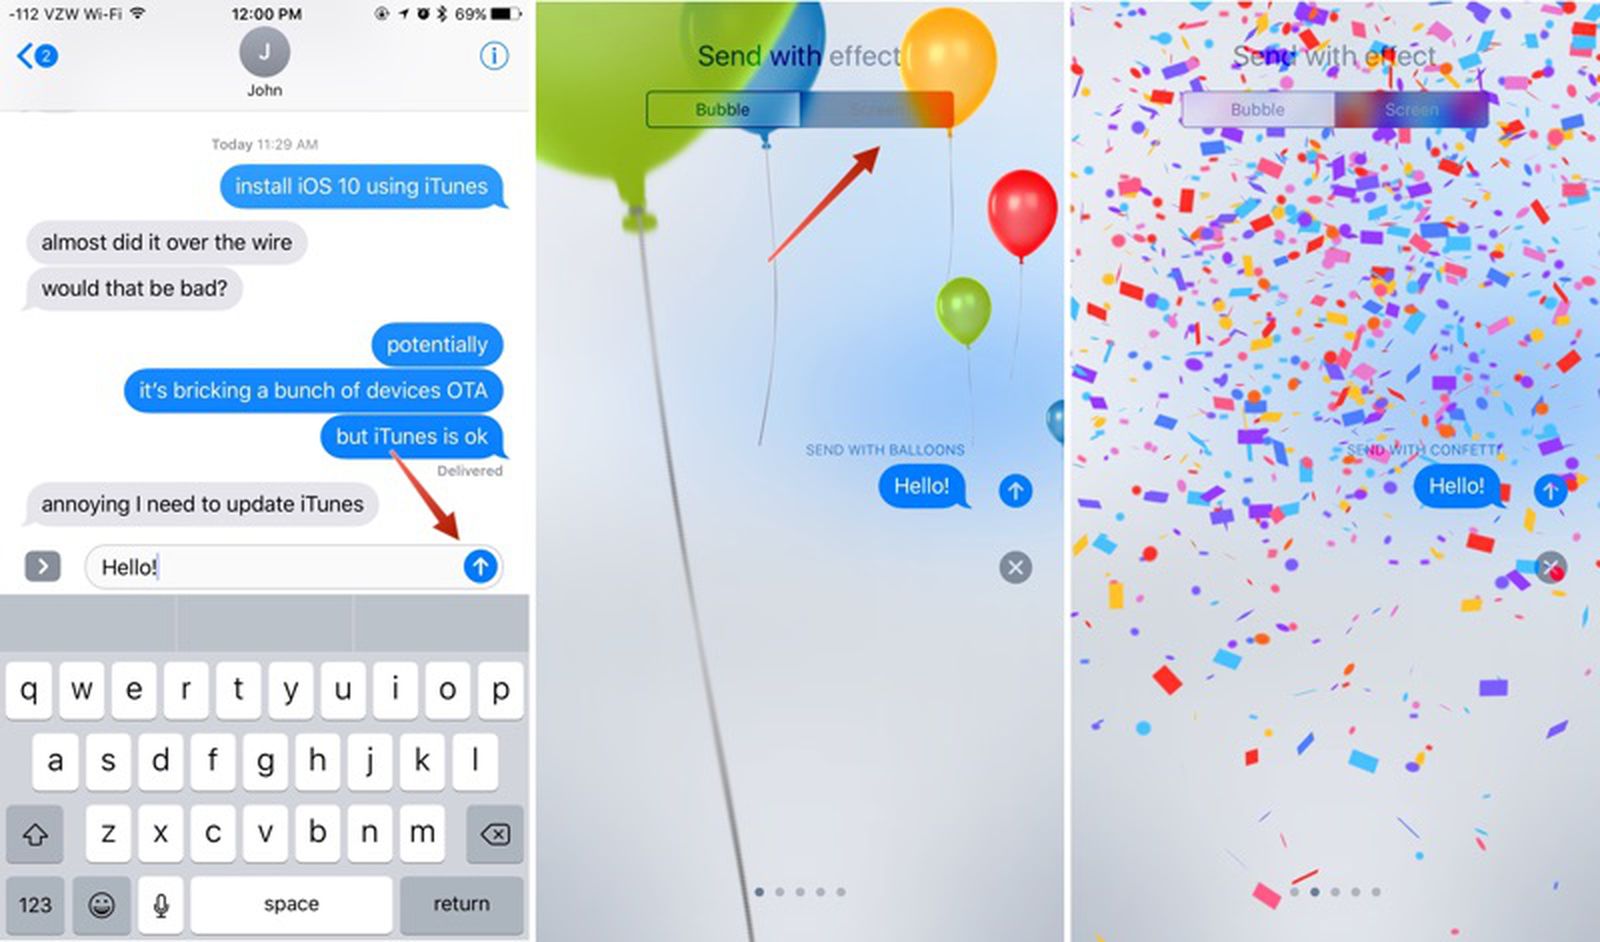 How to Send Confetti in Texts on iPhone 1